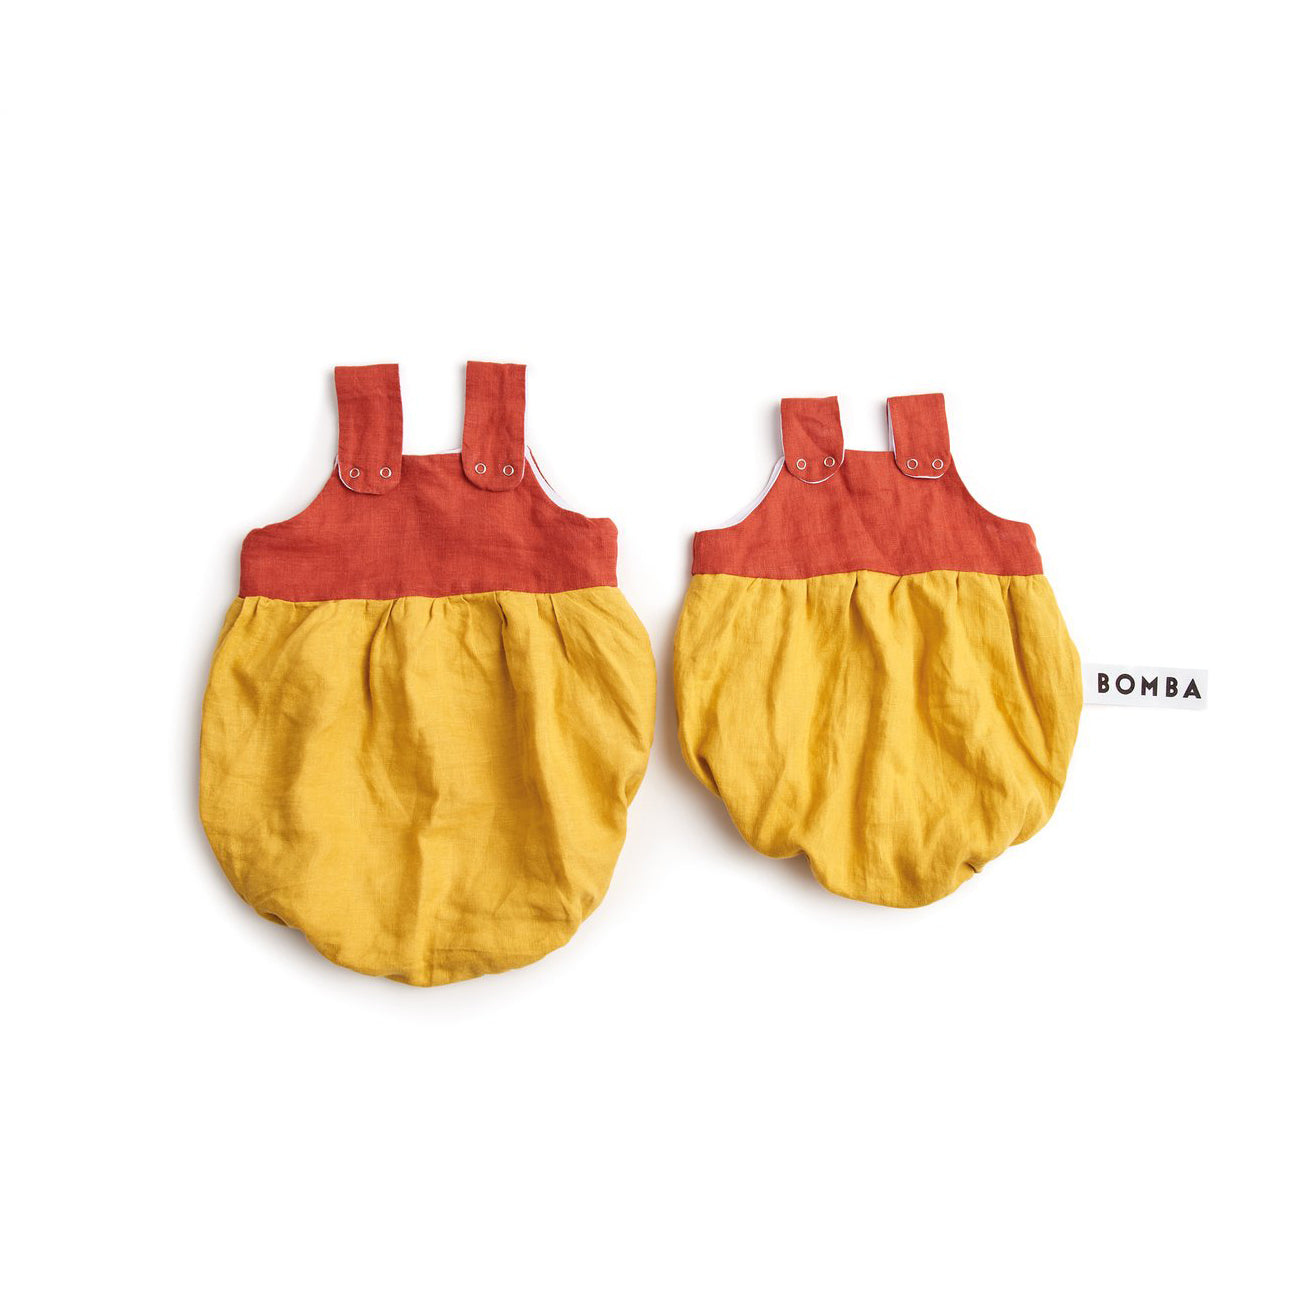 BOMBA Baby Romper in Red and Yellow